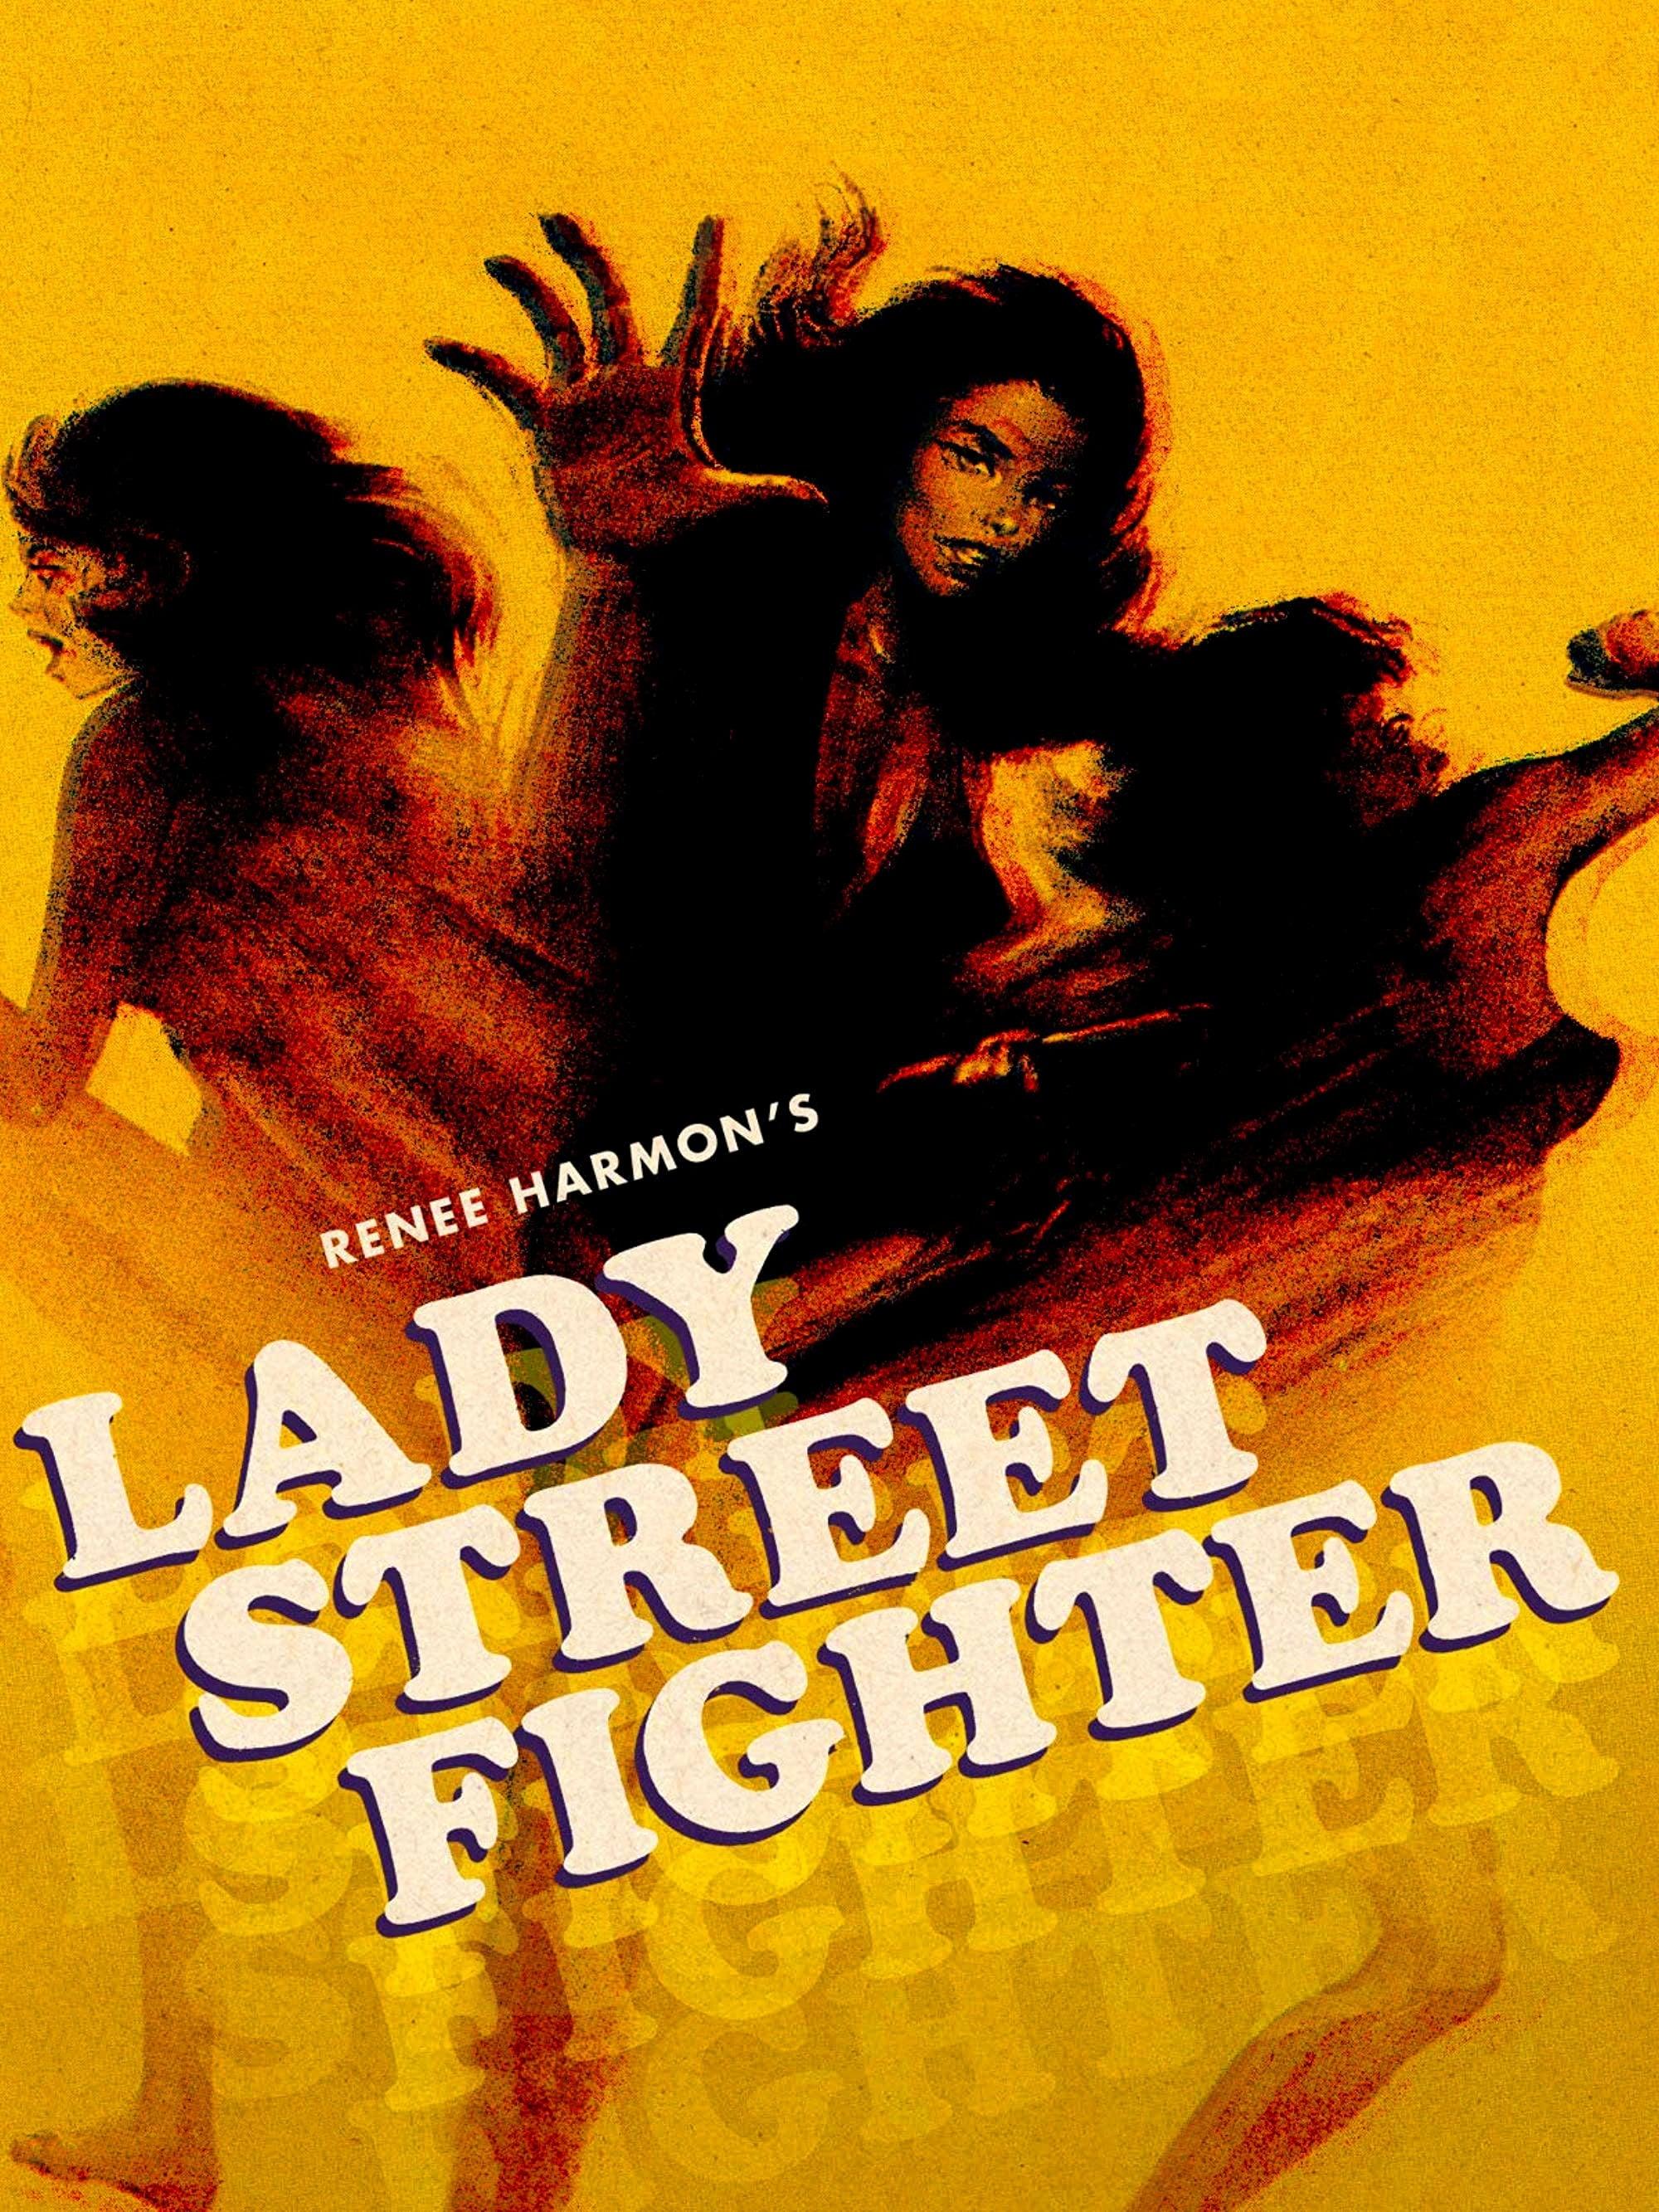 Lady Street Fighter poster